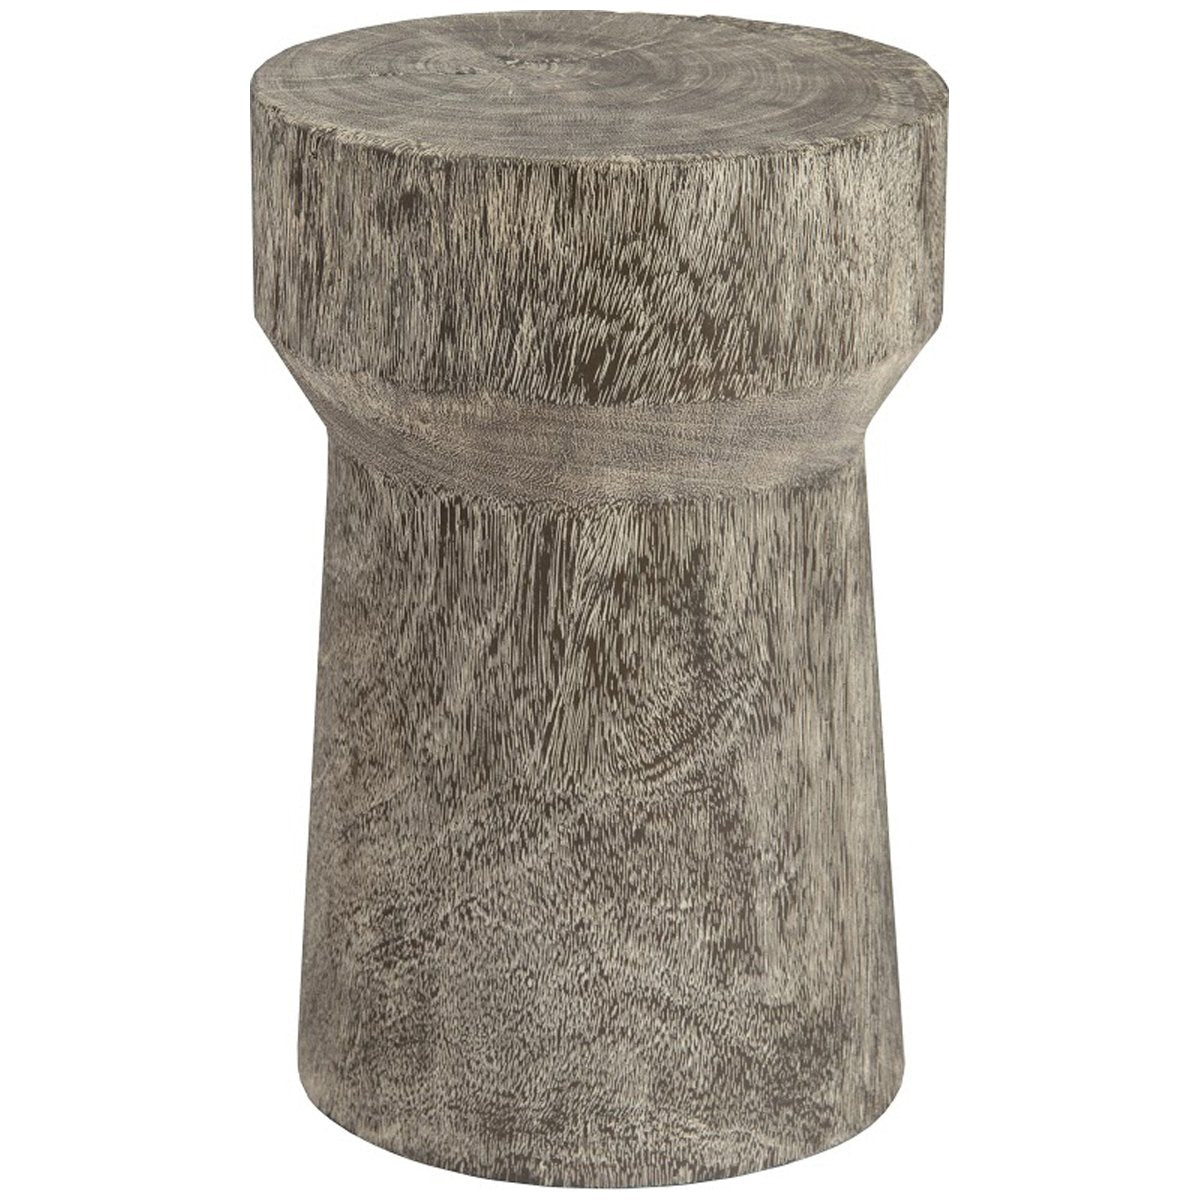 Phillips Collection Curved Wood Stool, Thick